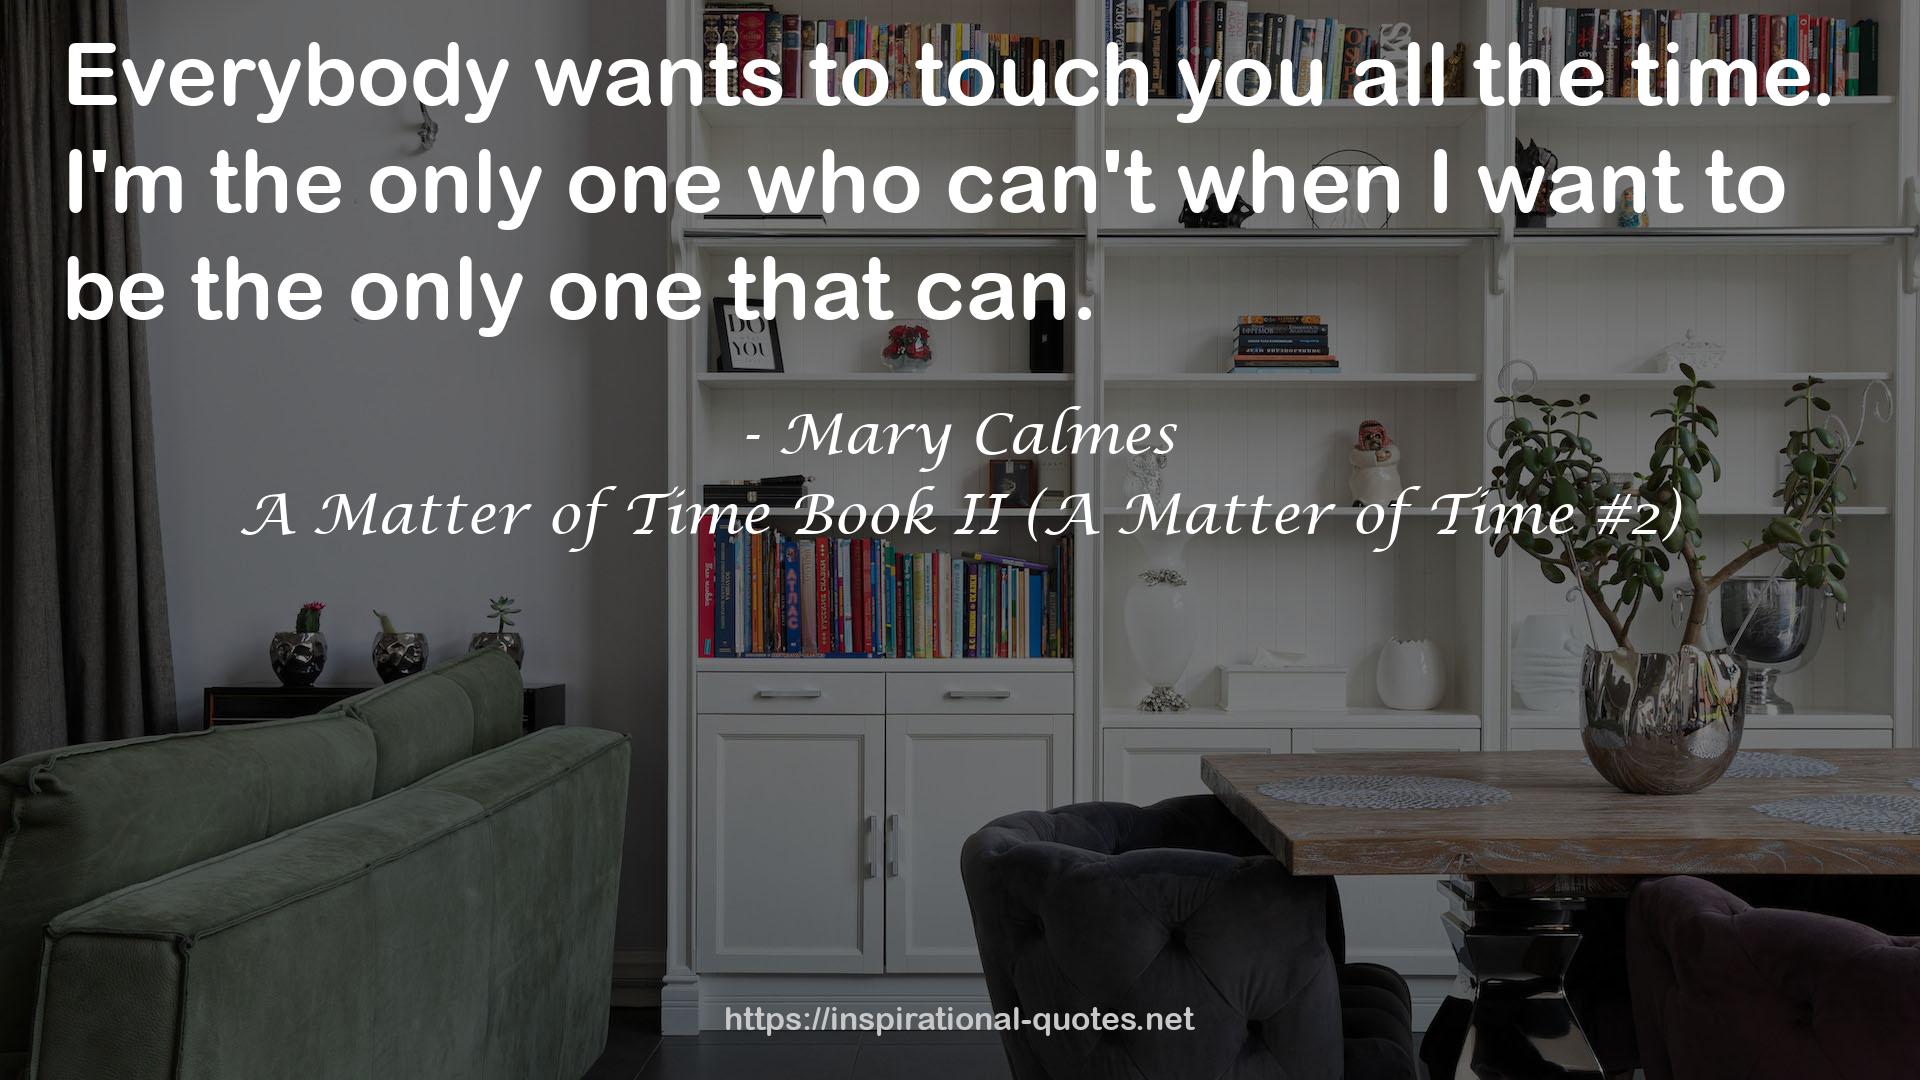 A Matter of Time Book II (A Matter of Time #2) QUOTES